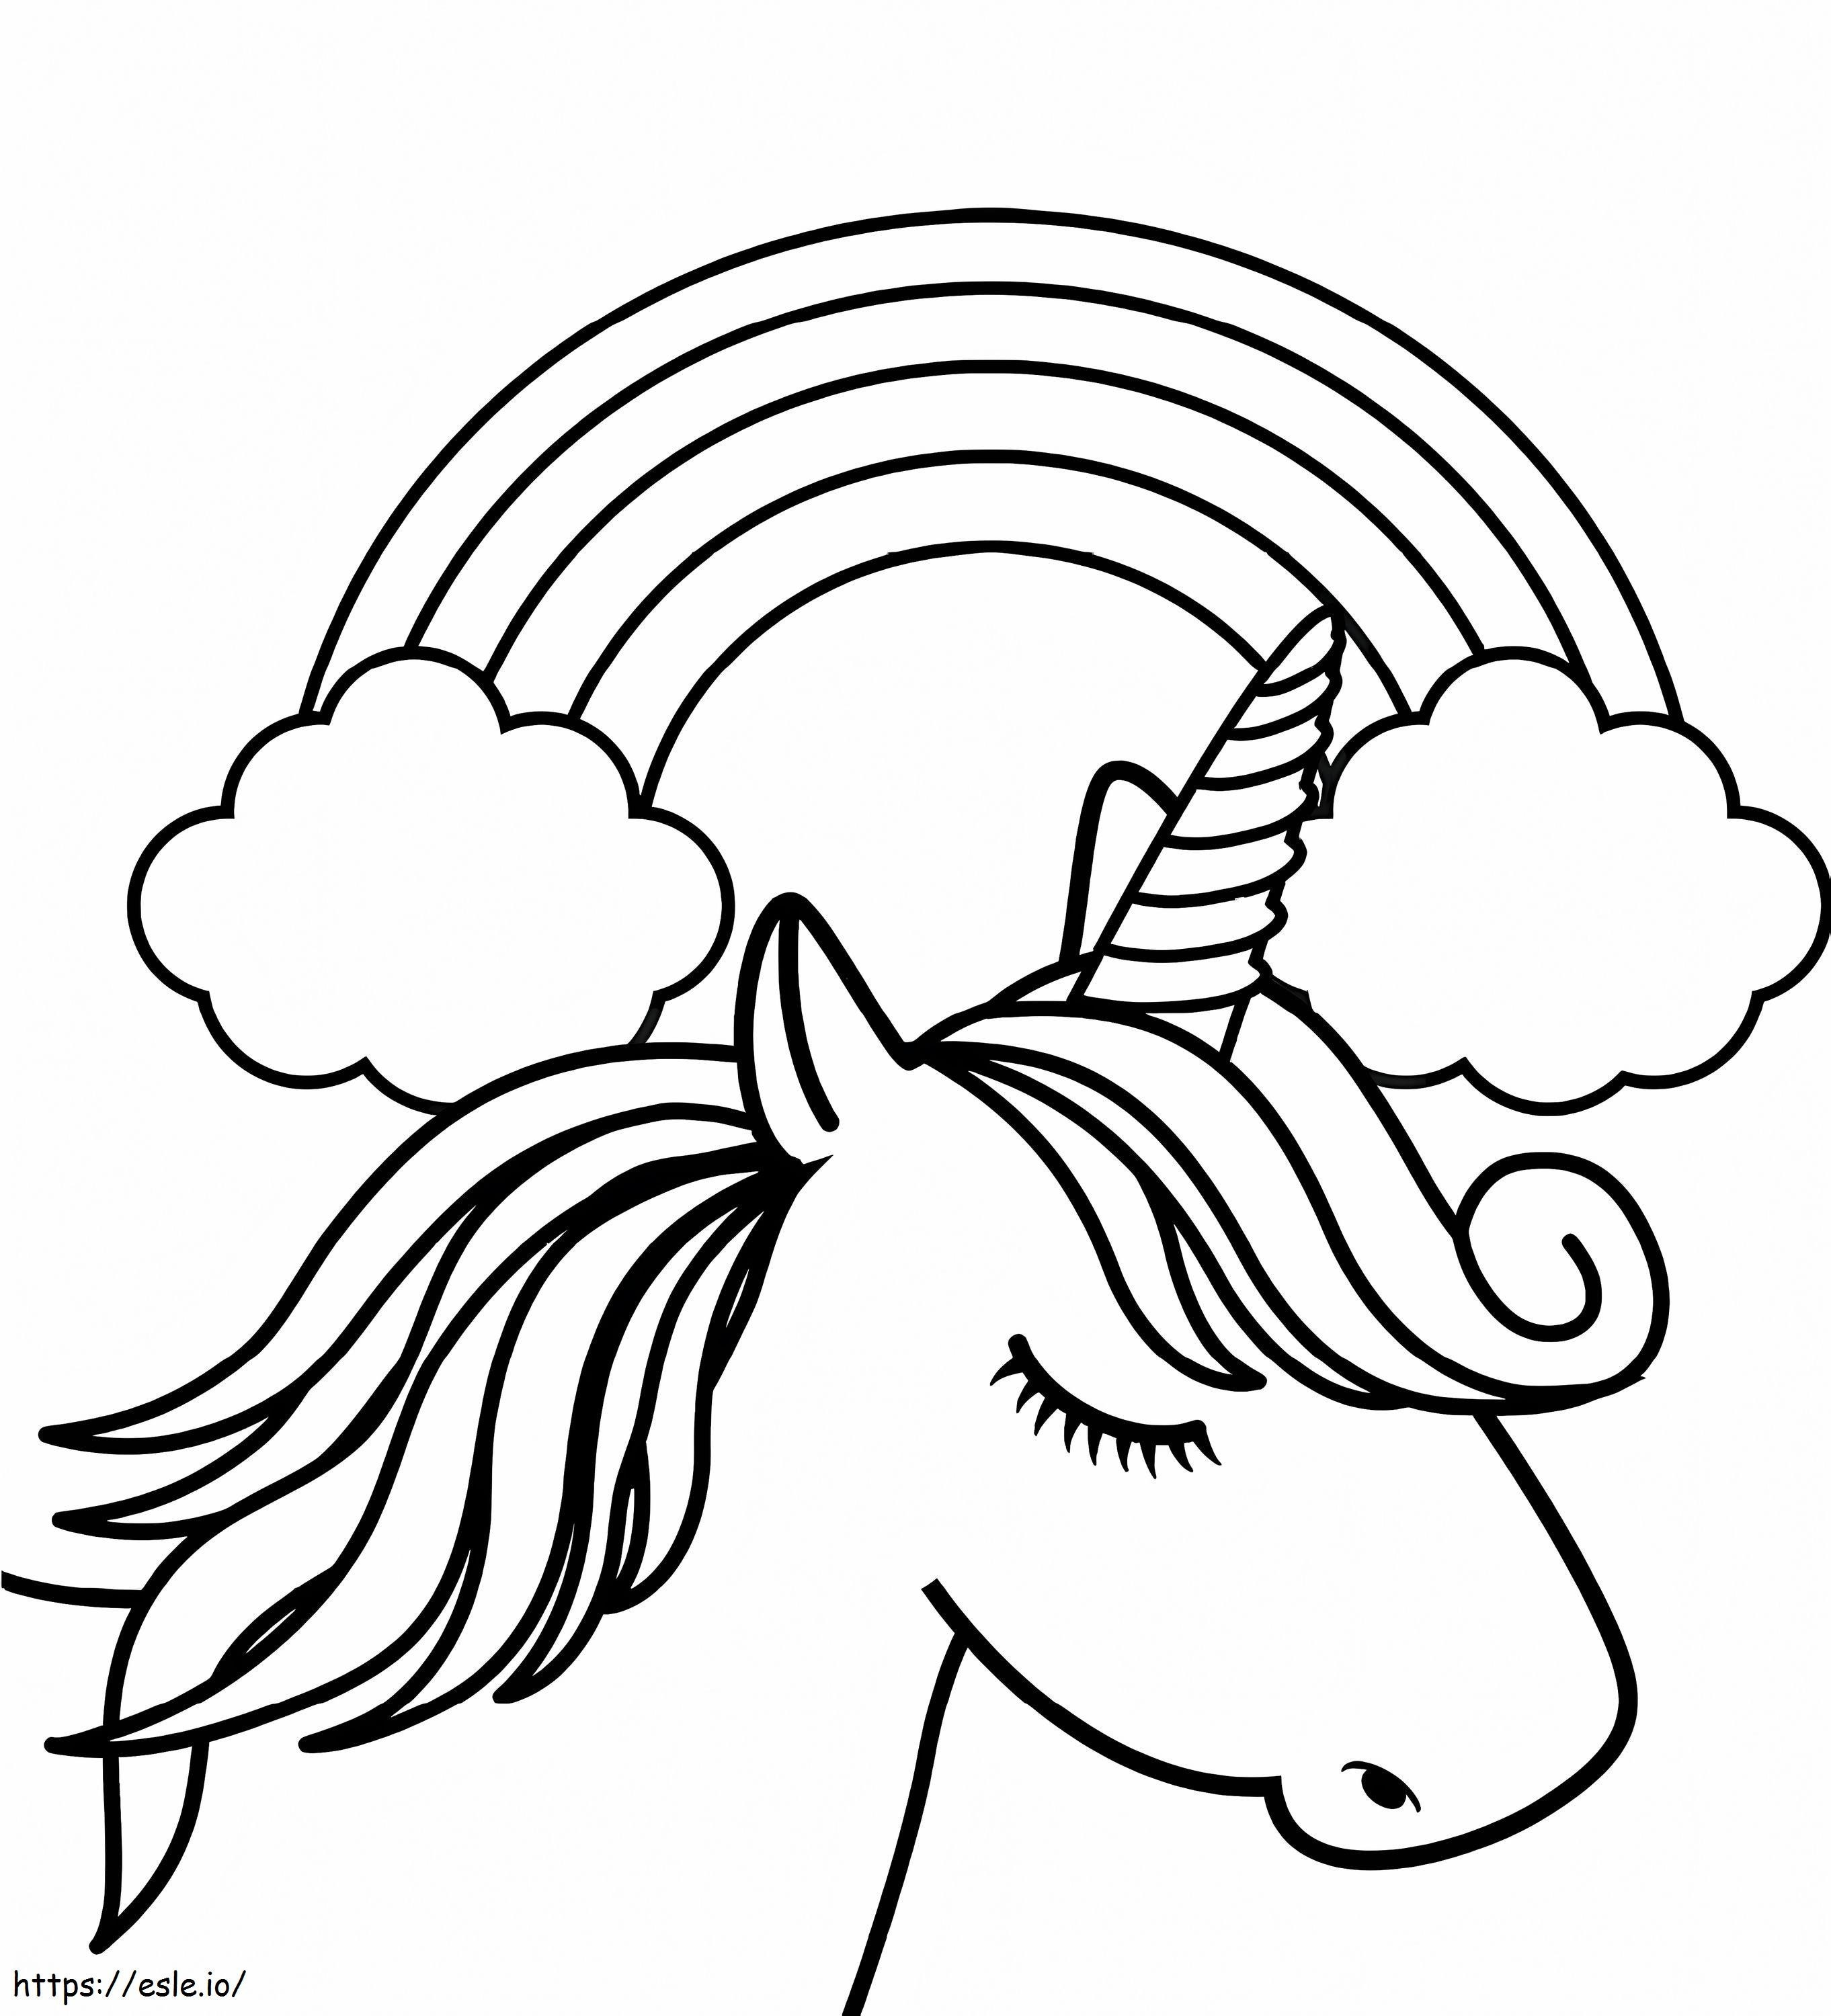 Unicorn Head With Rainbow coloring page